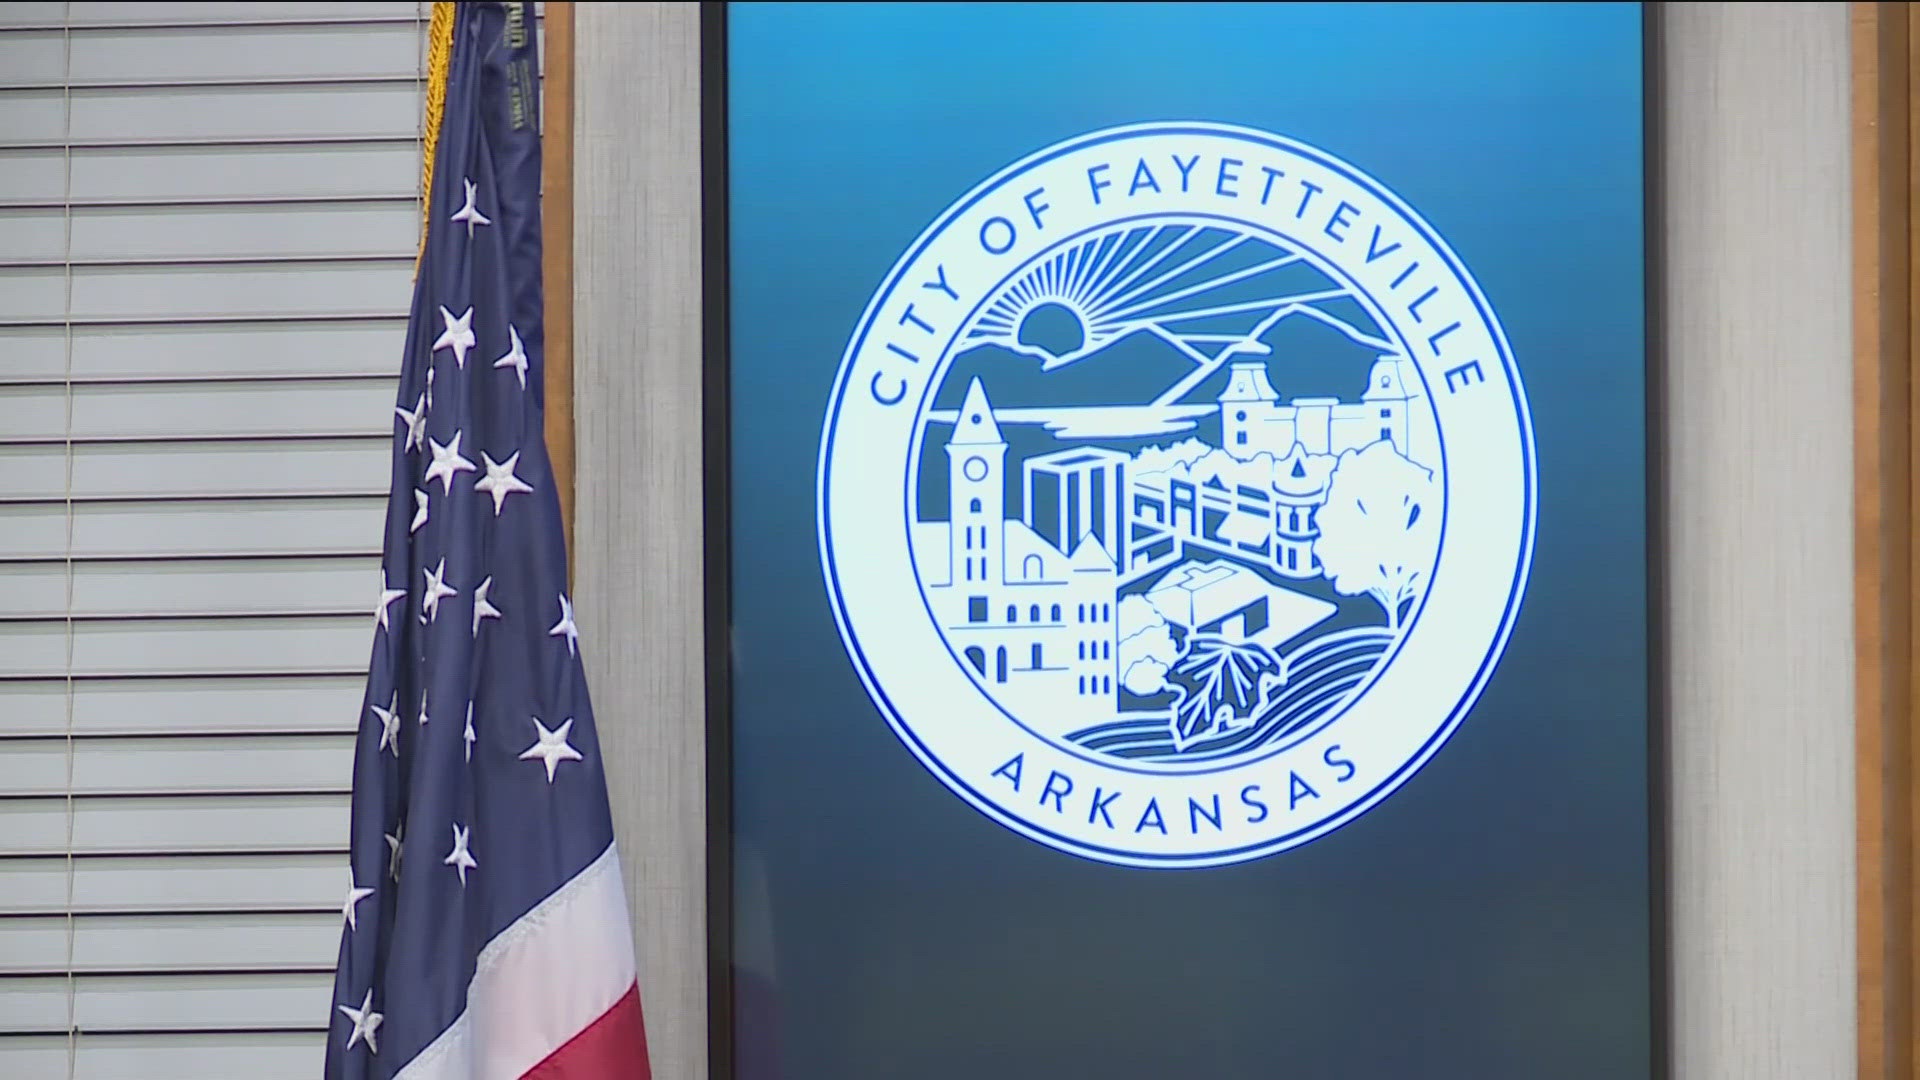 Check out the highlights of the Fayetteville Council meeting that lasted six hours.